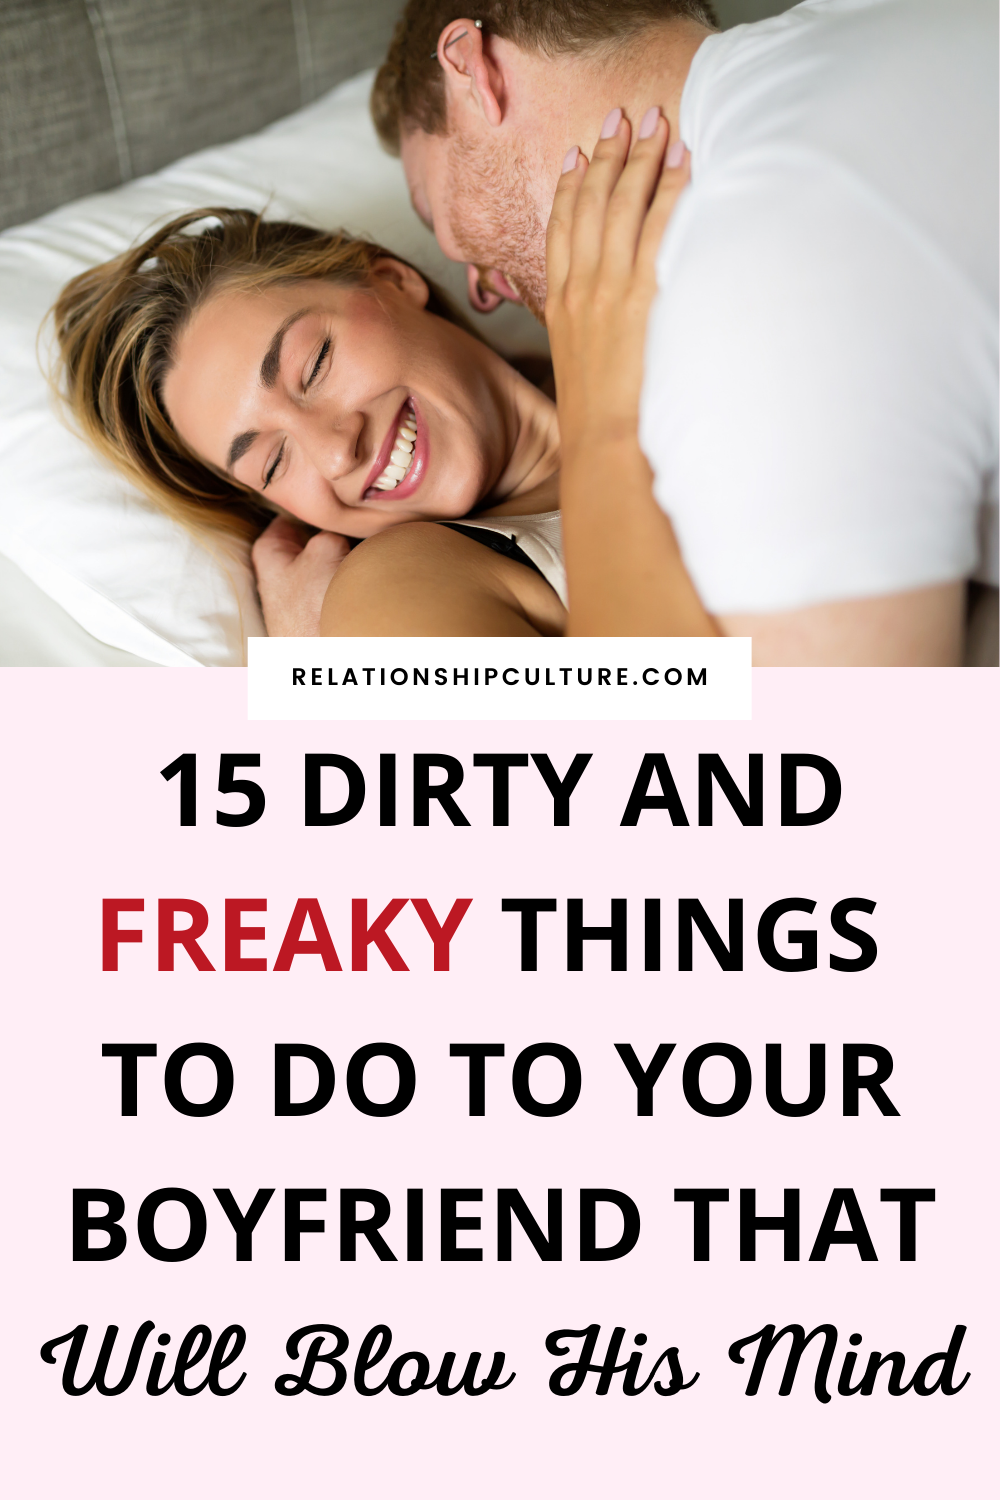 Ways to get freaky with your man